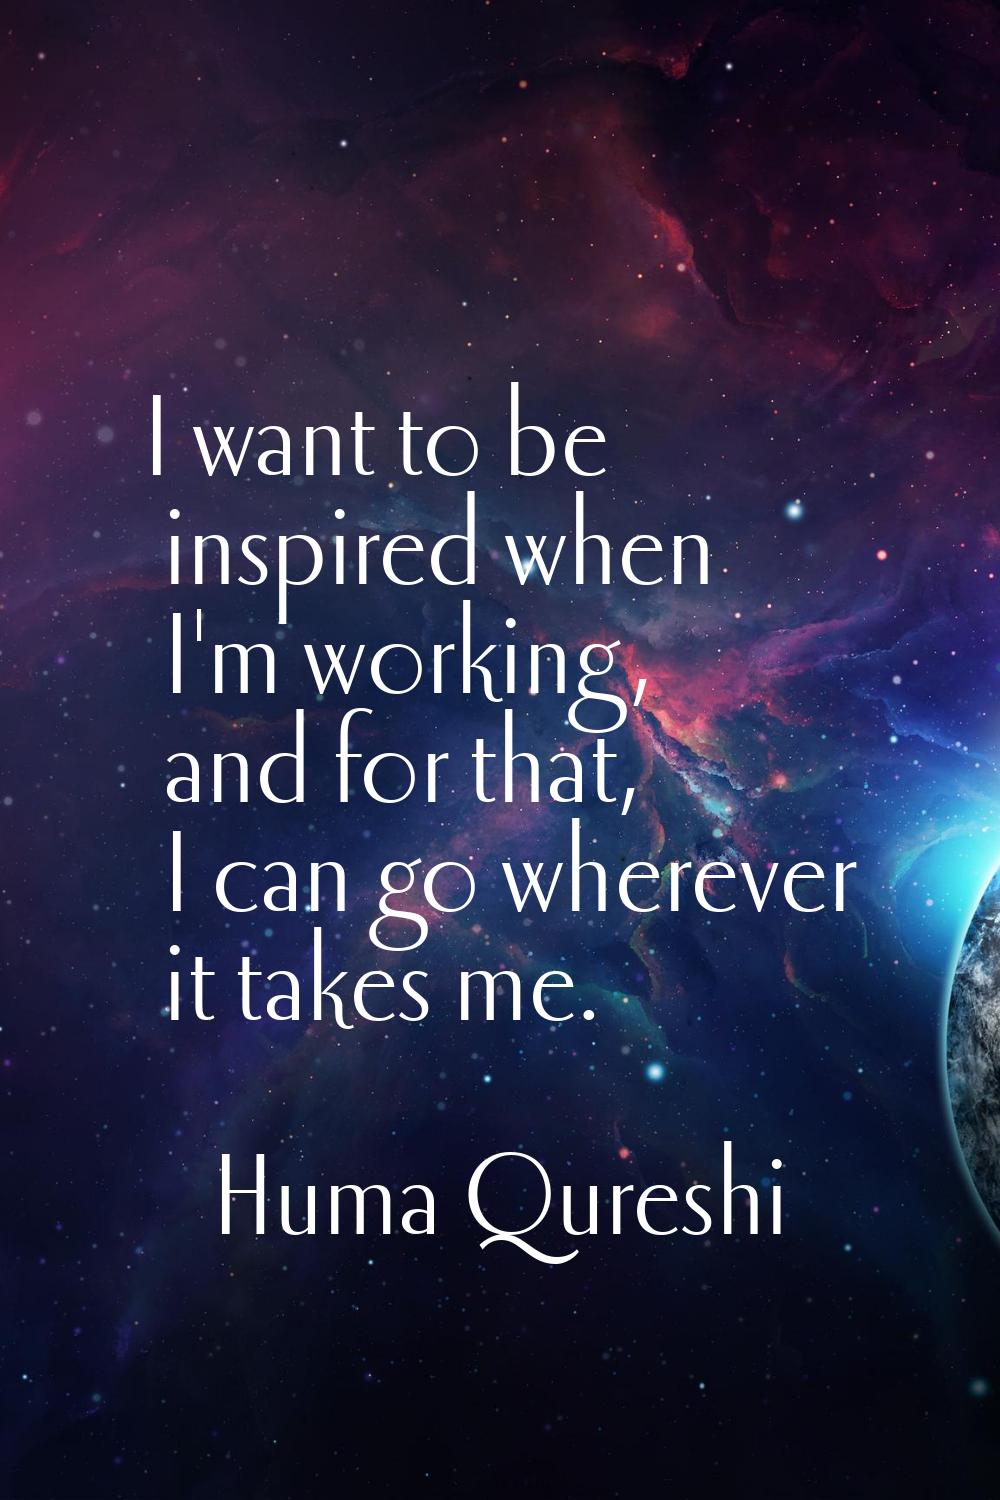 I want to be inspired when I'm working, and for that, I can go wherever it takes me.